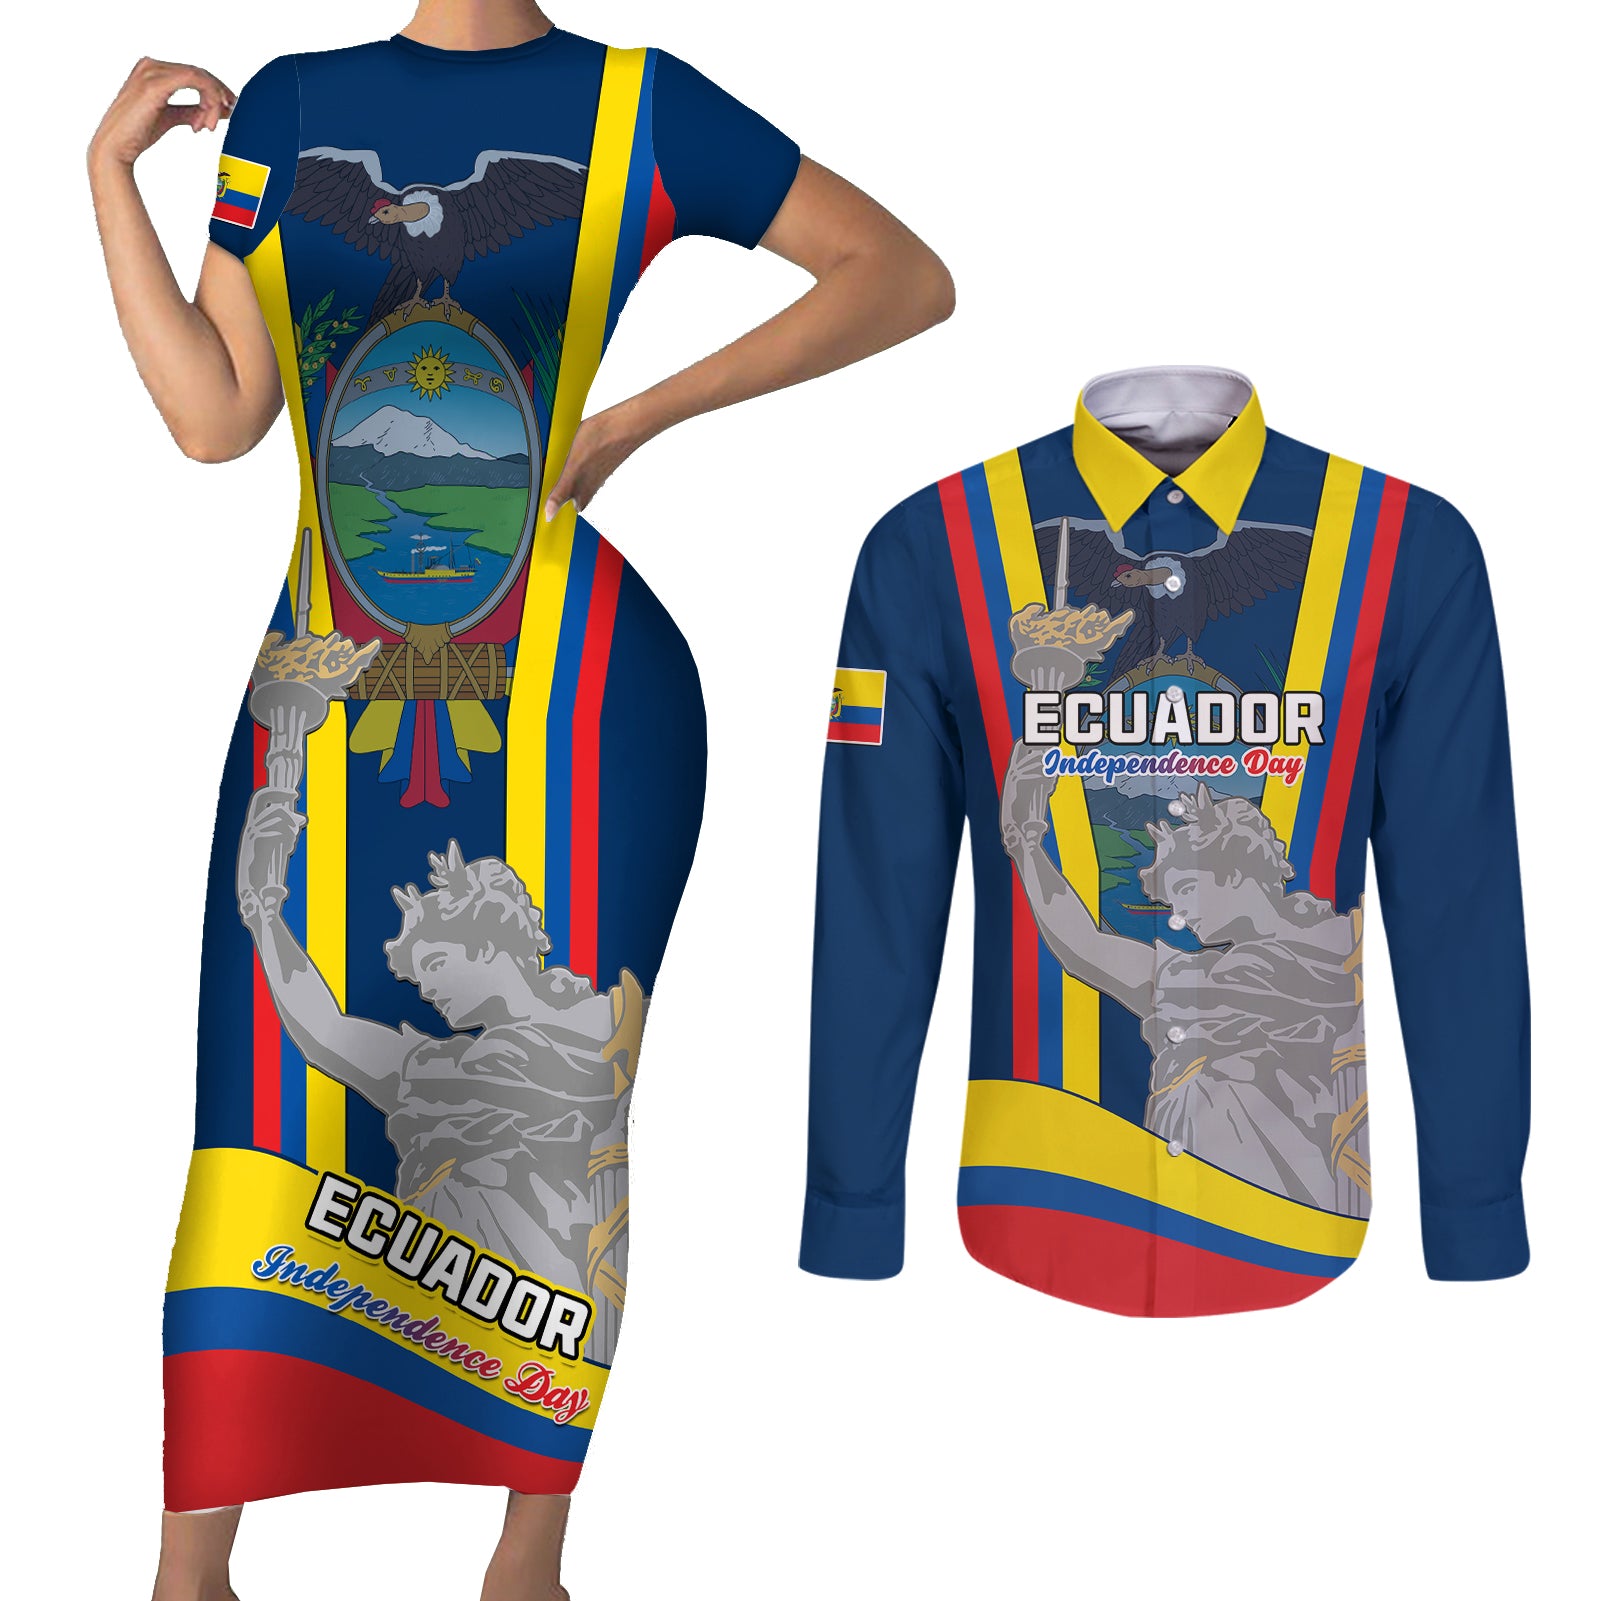 custom-ecuador-independence-day-couples-matching-short-sleeve-bodycon-dress-and-long-sleeve-button-shirts-monumento-a-la-independencia-quito-10th-august